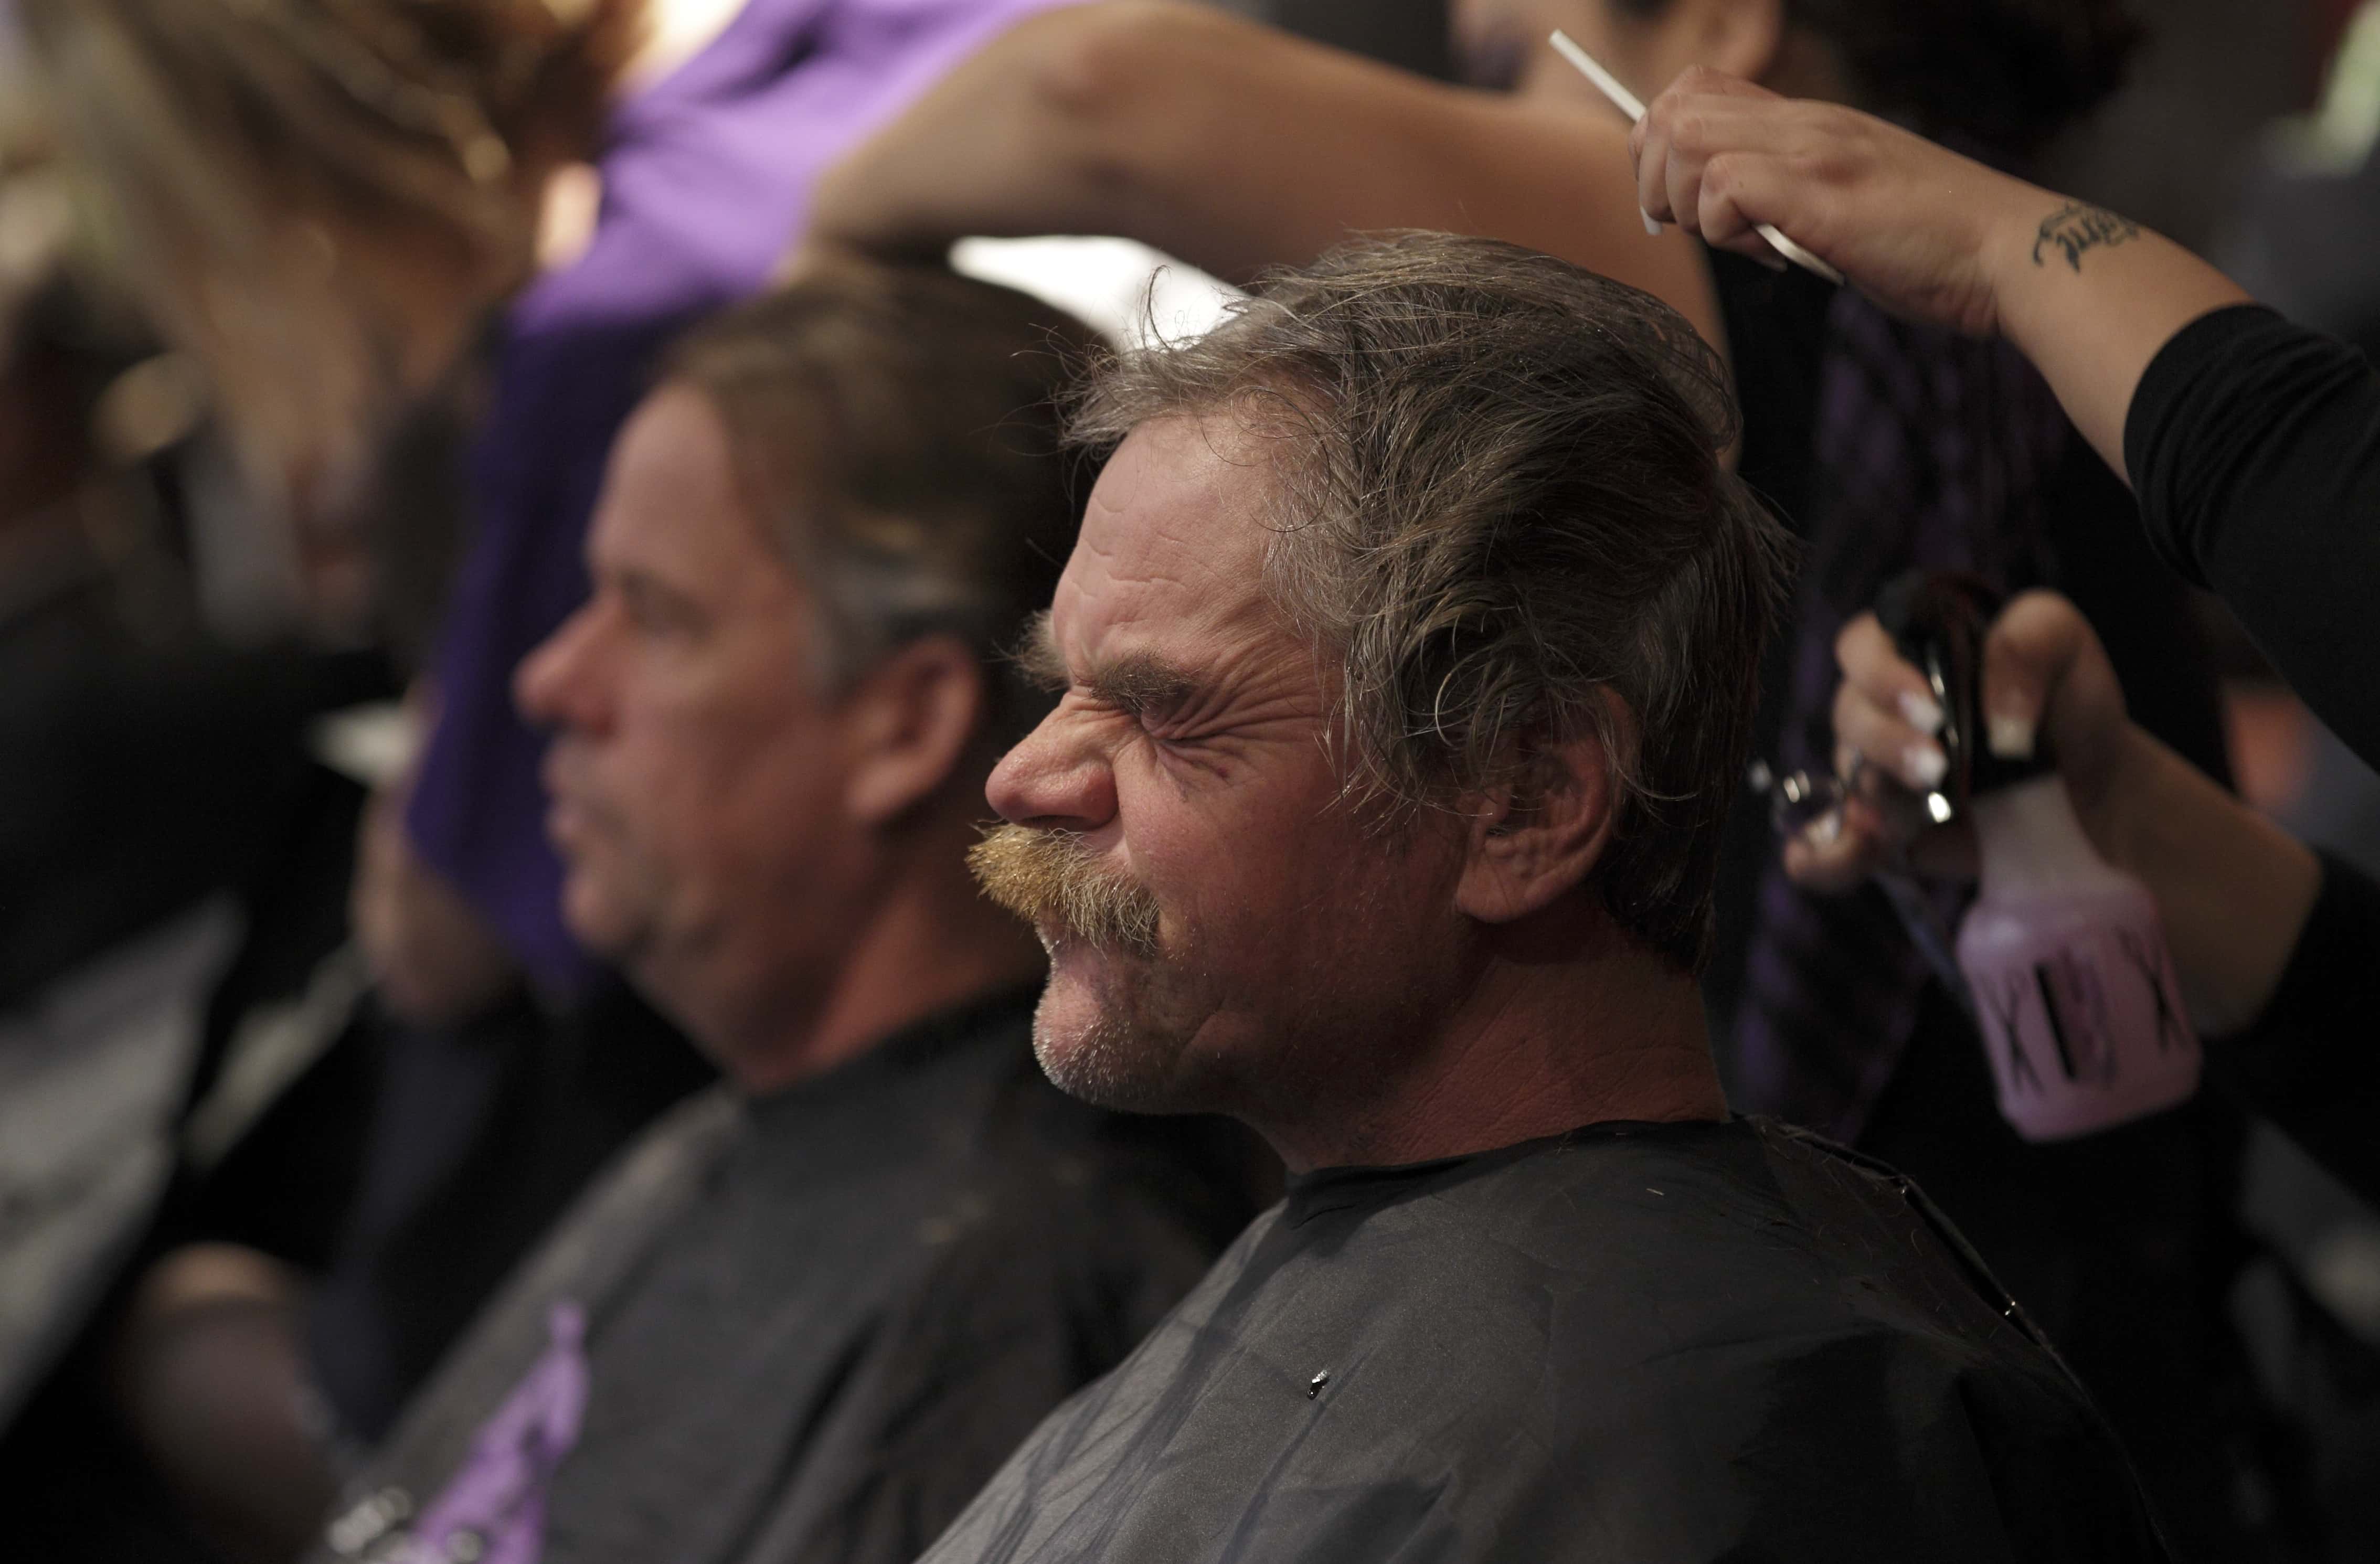 Over 200 Homeless Attend Free Haircut And Food Event Ksro